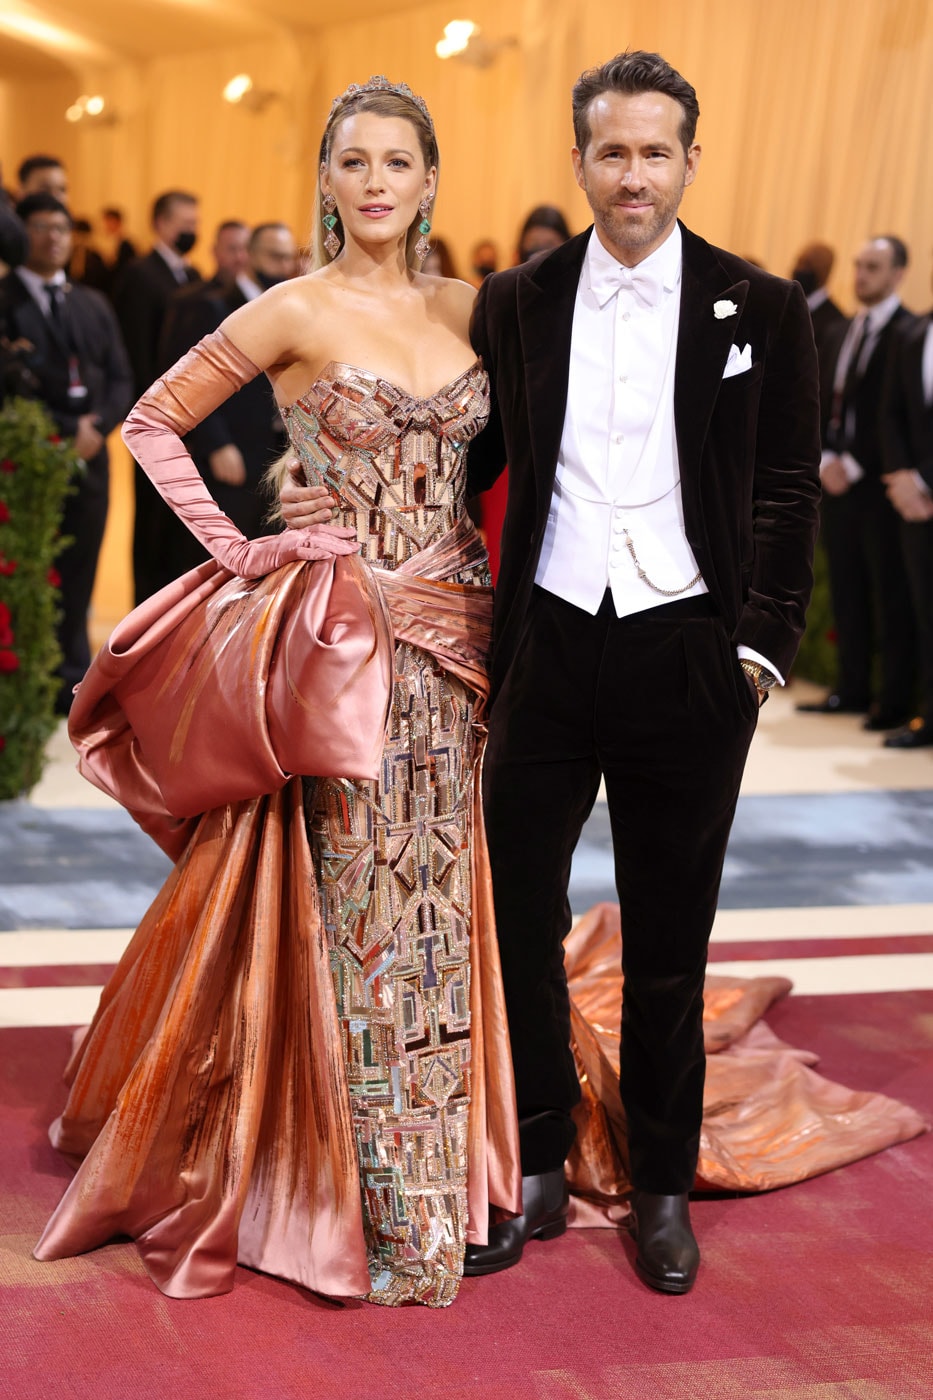 Met Gala 2022: Unforgettable red carpet looks from fashion's